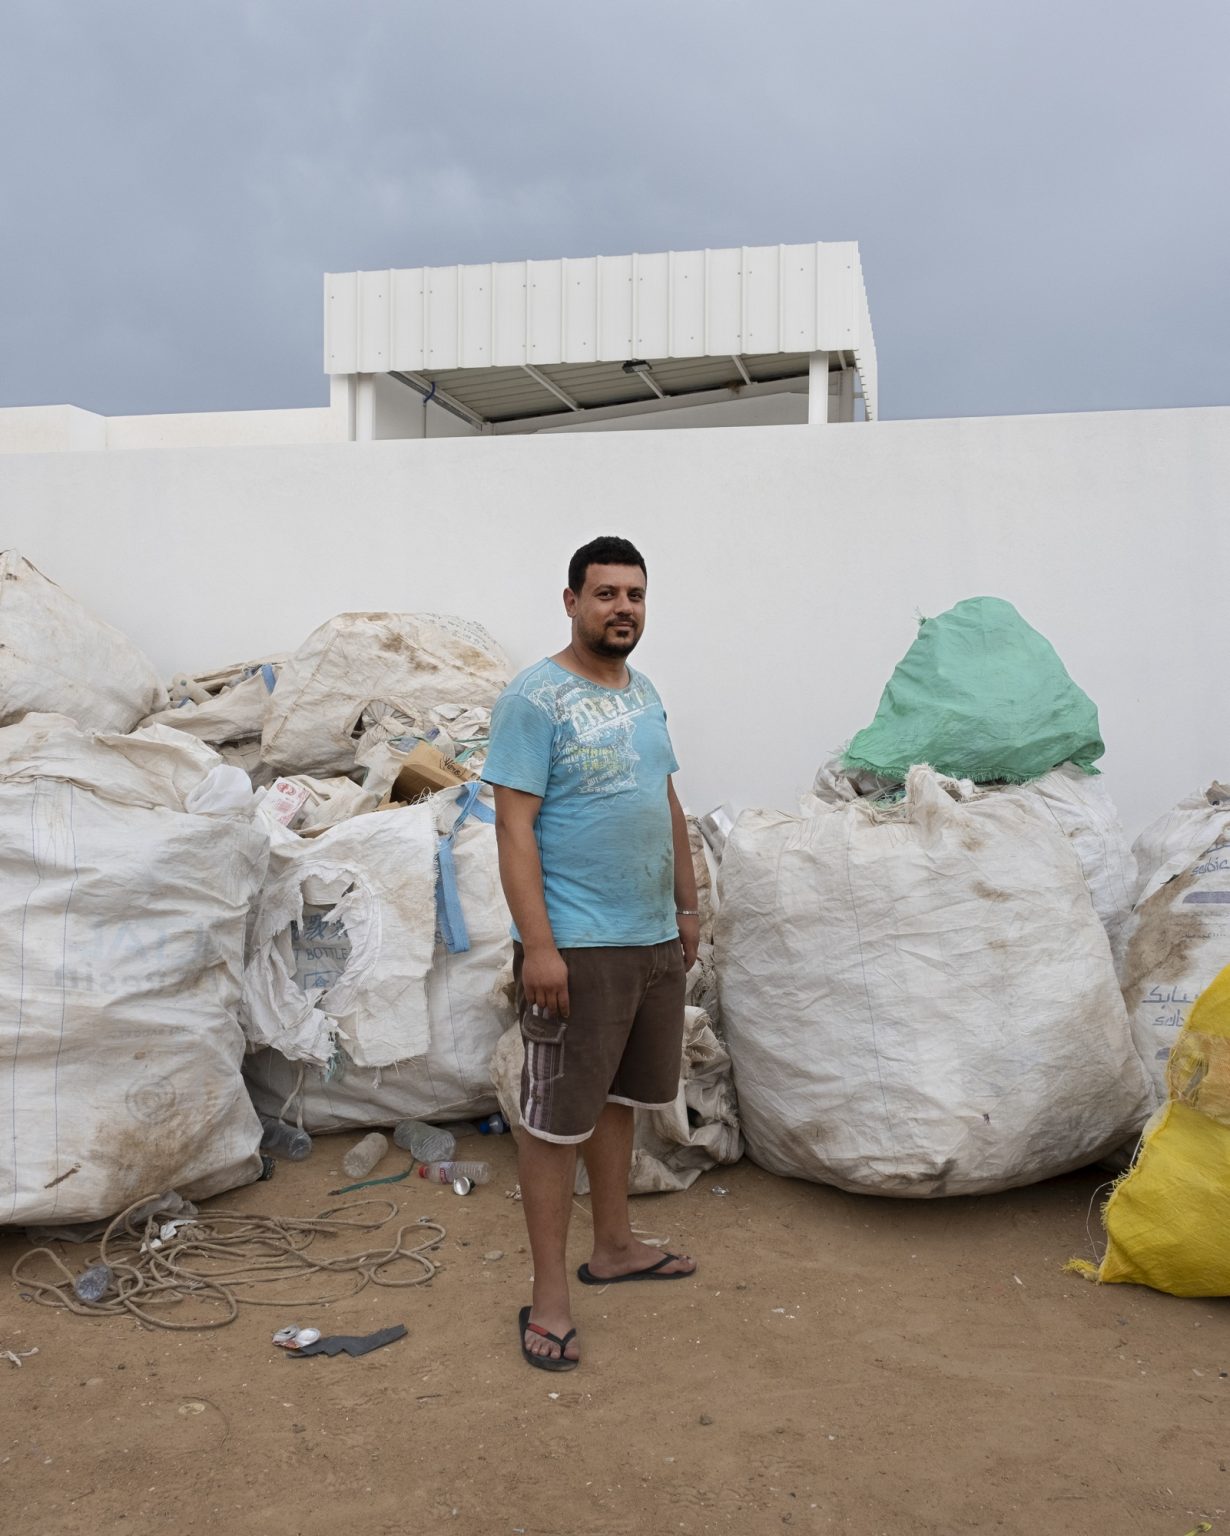 Kerkennah Islands (Tunisia), June 2022 - Portrait of Omar Racherem in his plastic recycling factory. Plastic waste represents a big problem for the island's ecosystem. Born in 2014, Kerkenna Plastic is committed to tackling the problem through a system of collectors that recover the plastic and take it to the recycling center, where it is pressed and prepared to be sold to Spain. In 2021, 92 tons of plastic were collected. Collectors are paid 800 millim per kg and on average each collector can collect about 50 kg per day.
><
Isole Kerkennah (Tunisia), giugno 2022 - Ritratto di Omar Racherem nella sua fabbrica di riciclaggio della plastica. I rifiuti in plastica rappresentano un grande problema per lecosistema dellisola. Nata nel 2014, Kerkenna Plastic, si impegna a far fronte al problema attraverso un sistema di raccoglitori che recuperano la plastica e la portano al centro di riciclaggio, dove viene pressata e preparata per essere venduta alla Spagna. Nel 2021 sono state collezionate 92 tonnellate di plastica. Ai raccoglitori viene pagata 800 millim al kg e di media ogni raccoglitore può arrivare a raccoglierne circa 50 kg al giorno.